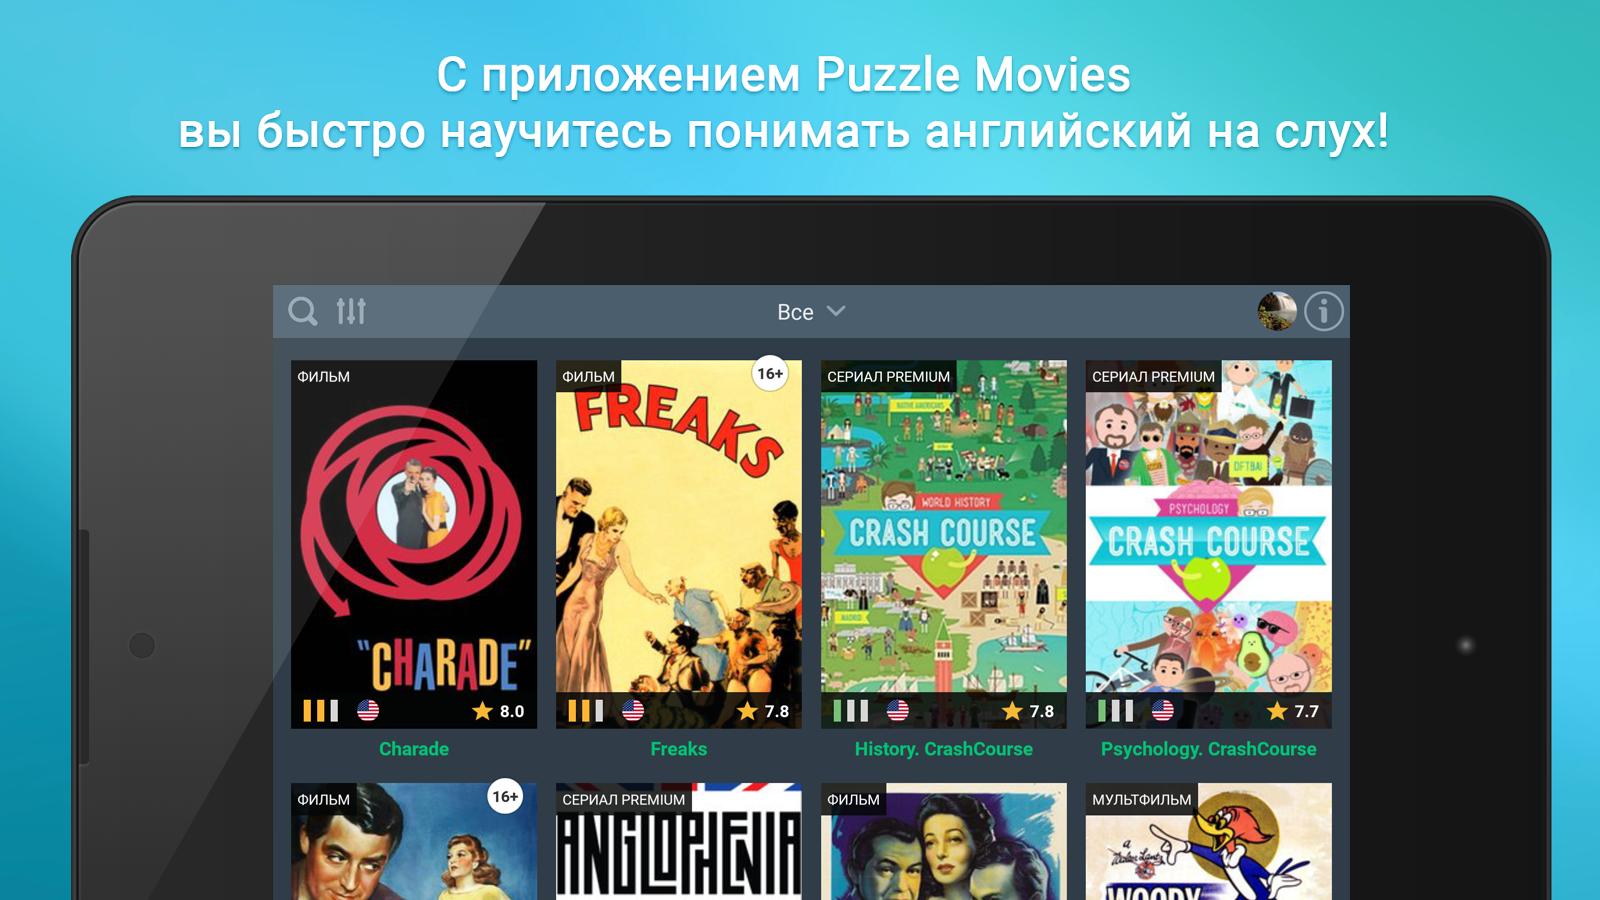 Puzzle movies. Пазл муви. Puzzle English movies. Приложение пазл муви.